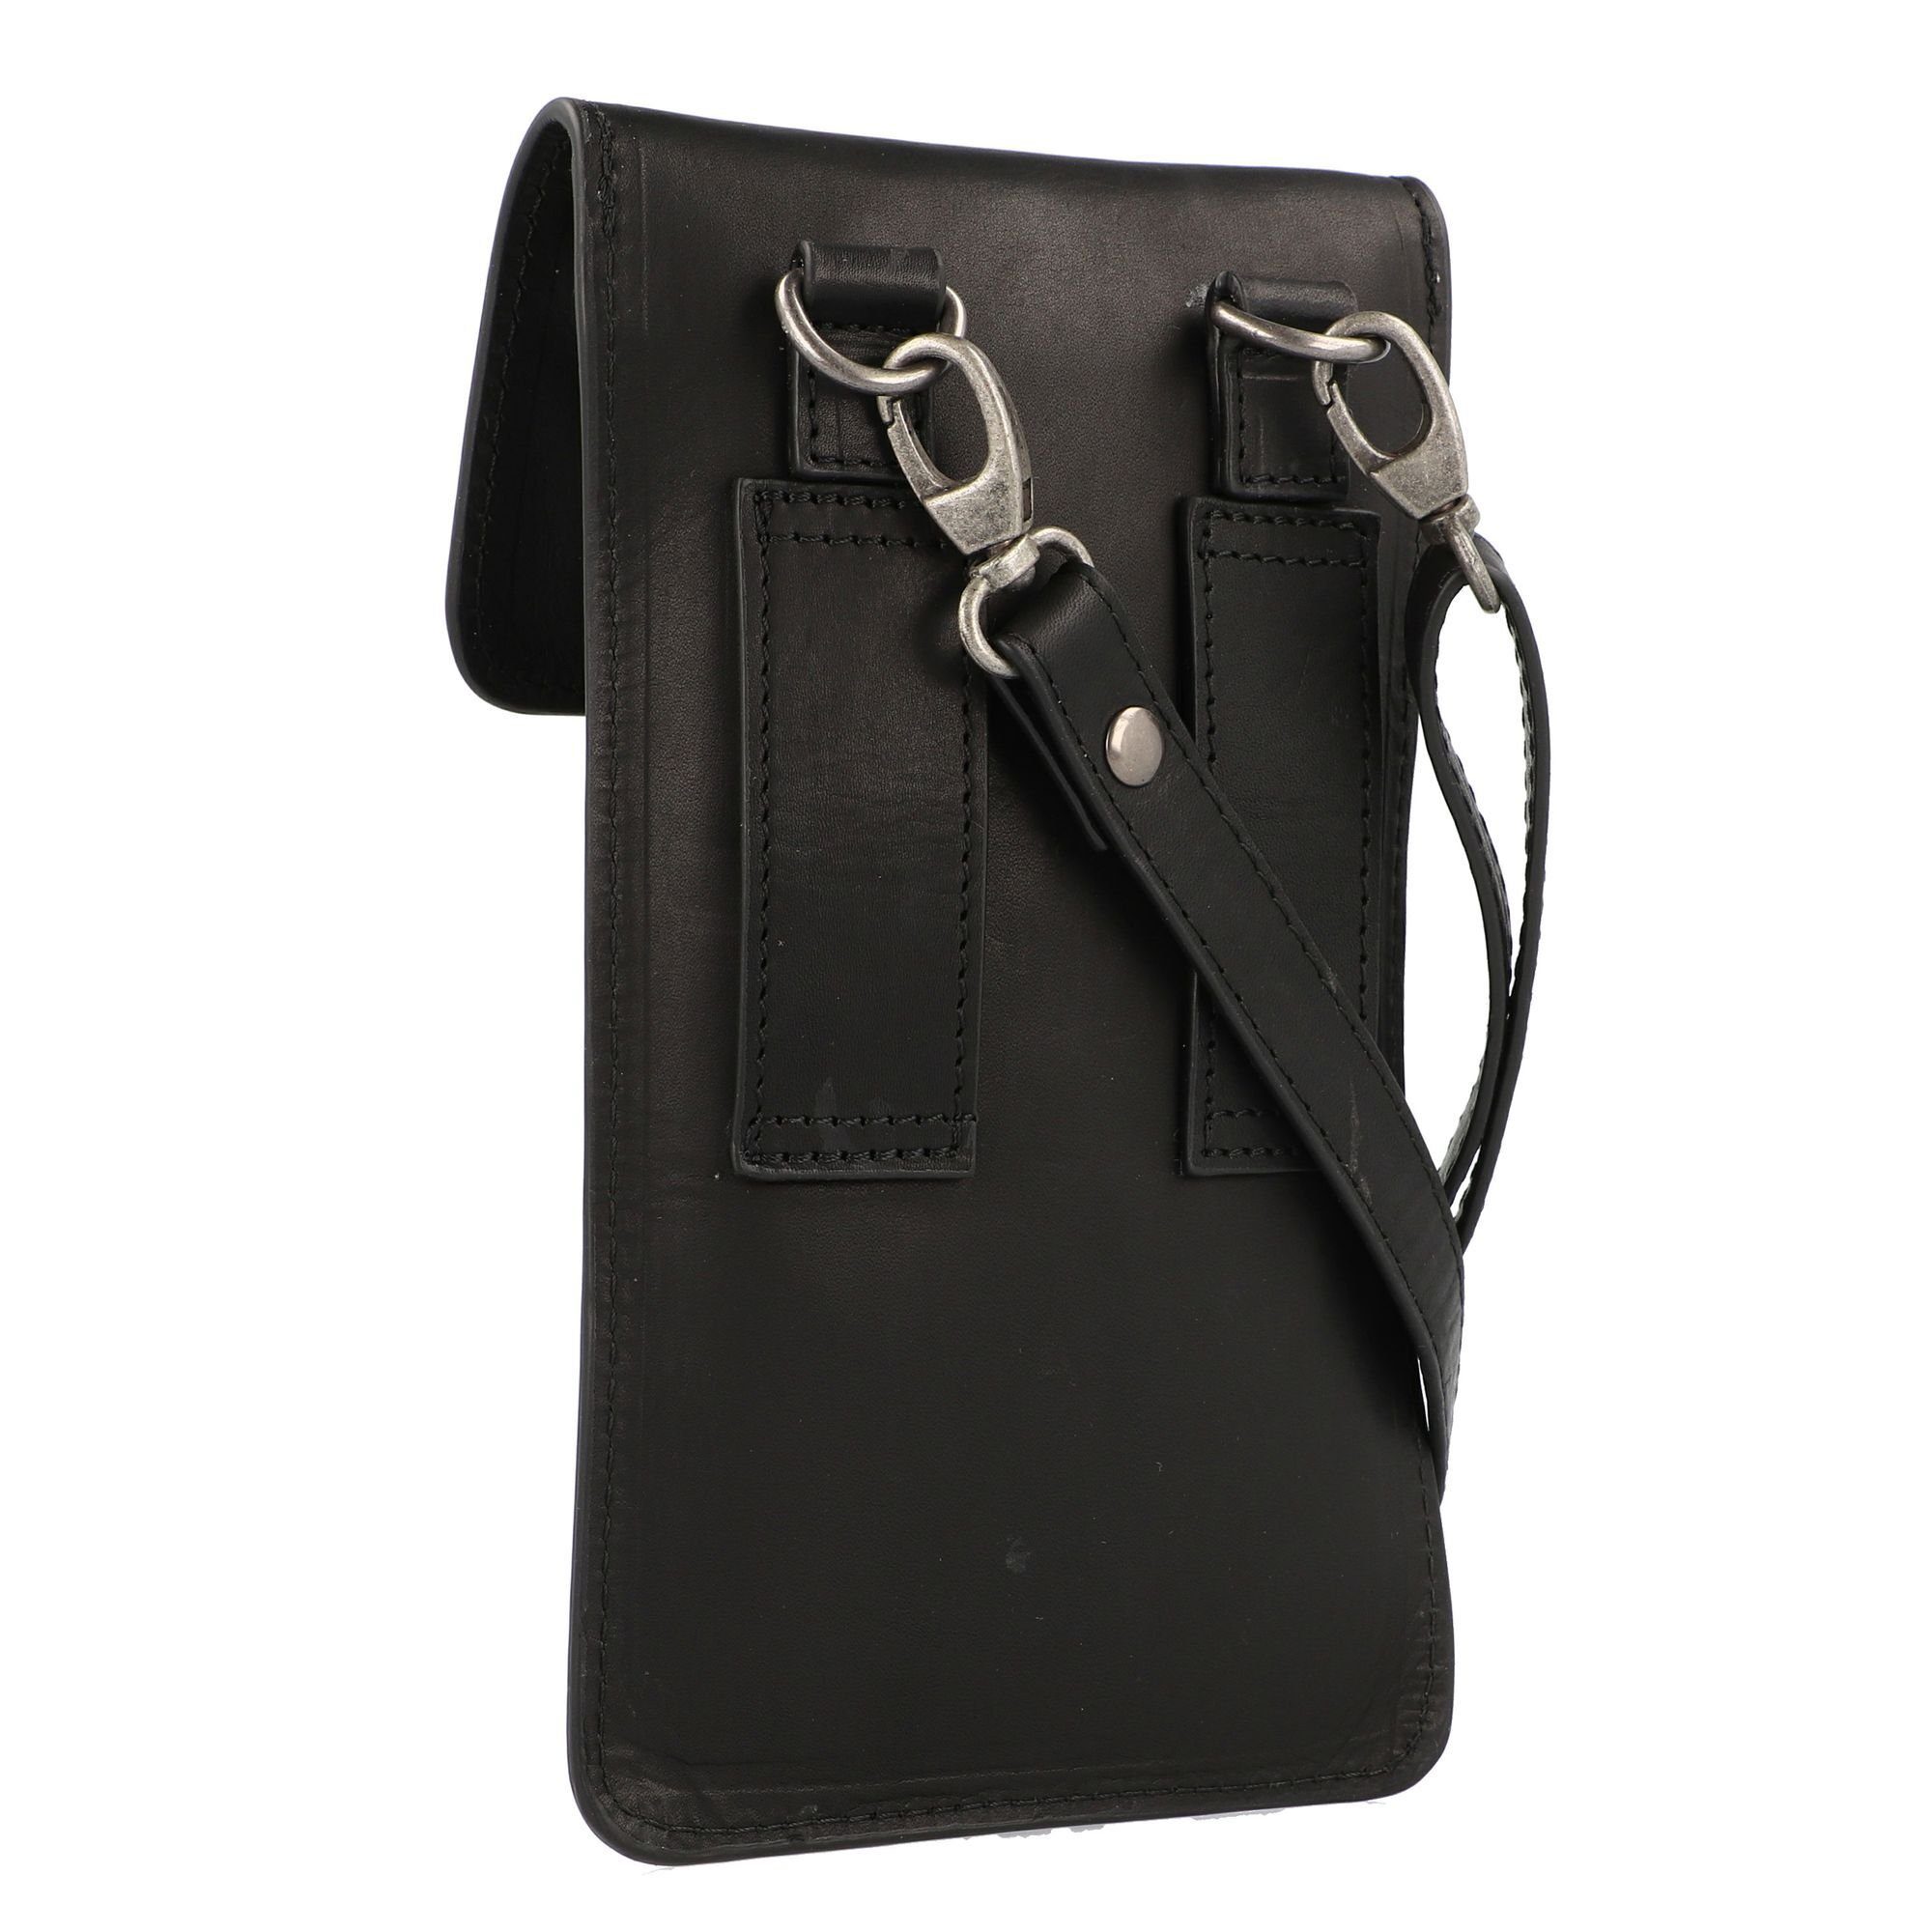 Smartphone-Hülle Leder Wax Chesterfield Pull Up, The schwarz Brand